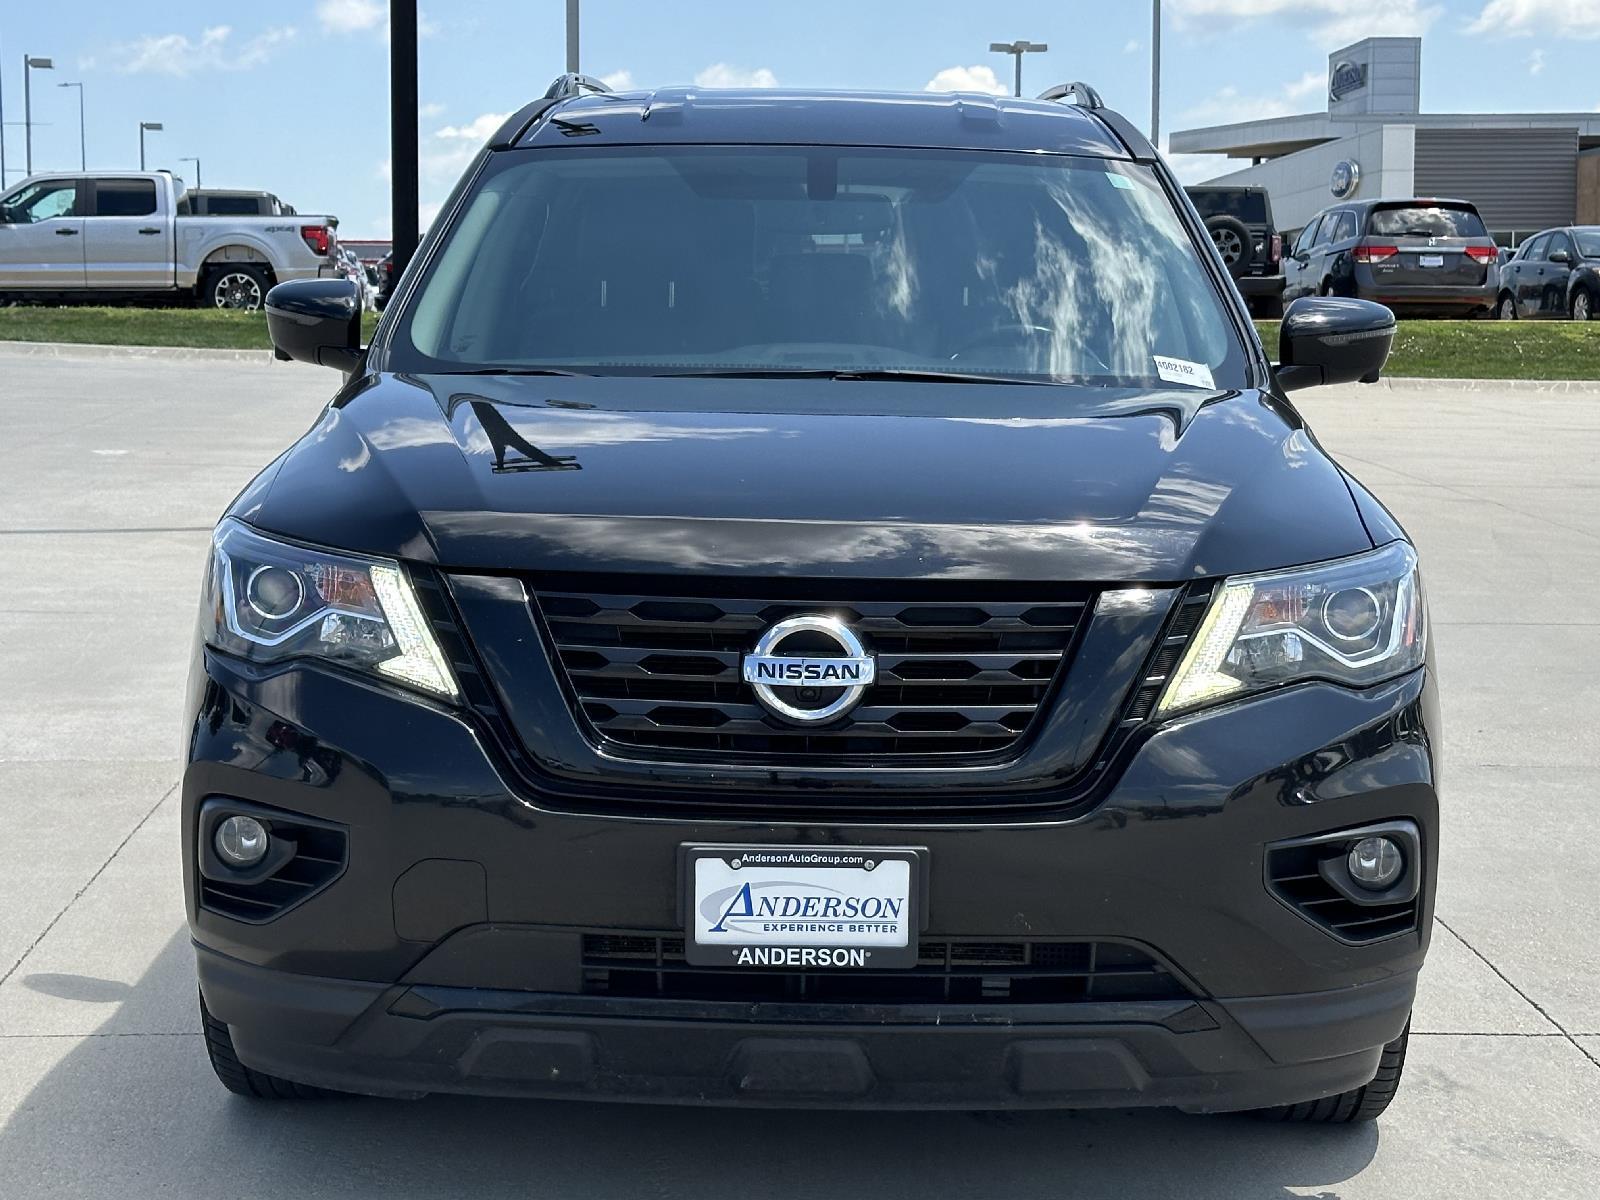 Used 2018 Nissan Pathfinder SL SUV for sale in Lincoln NE